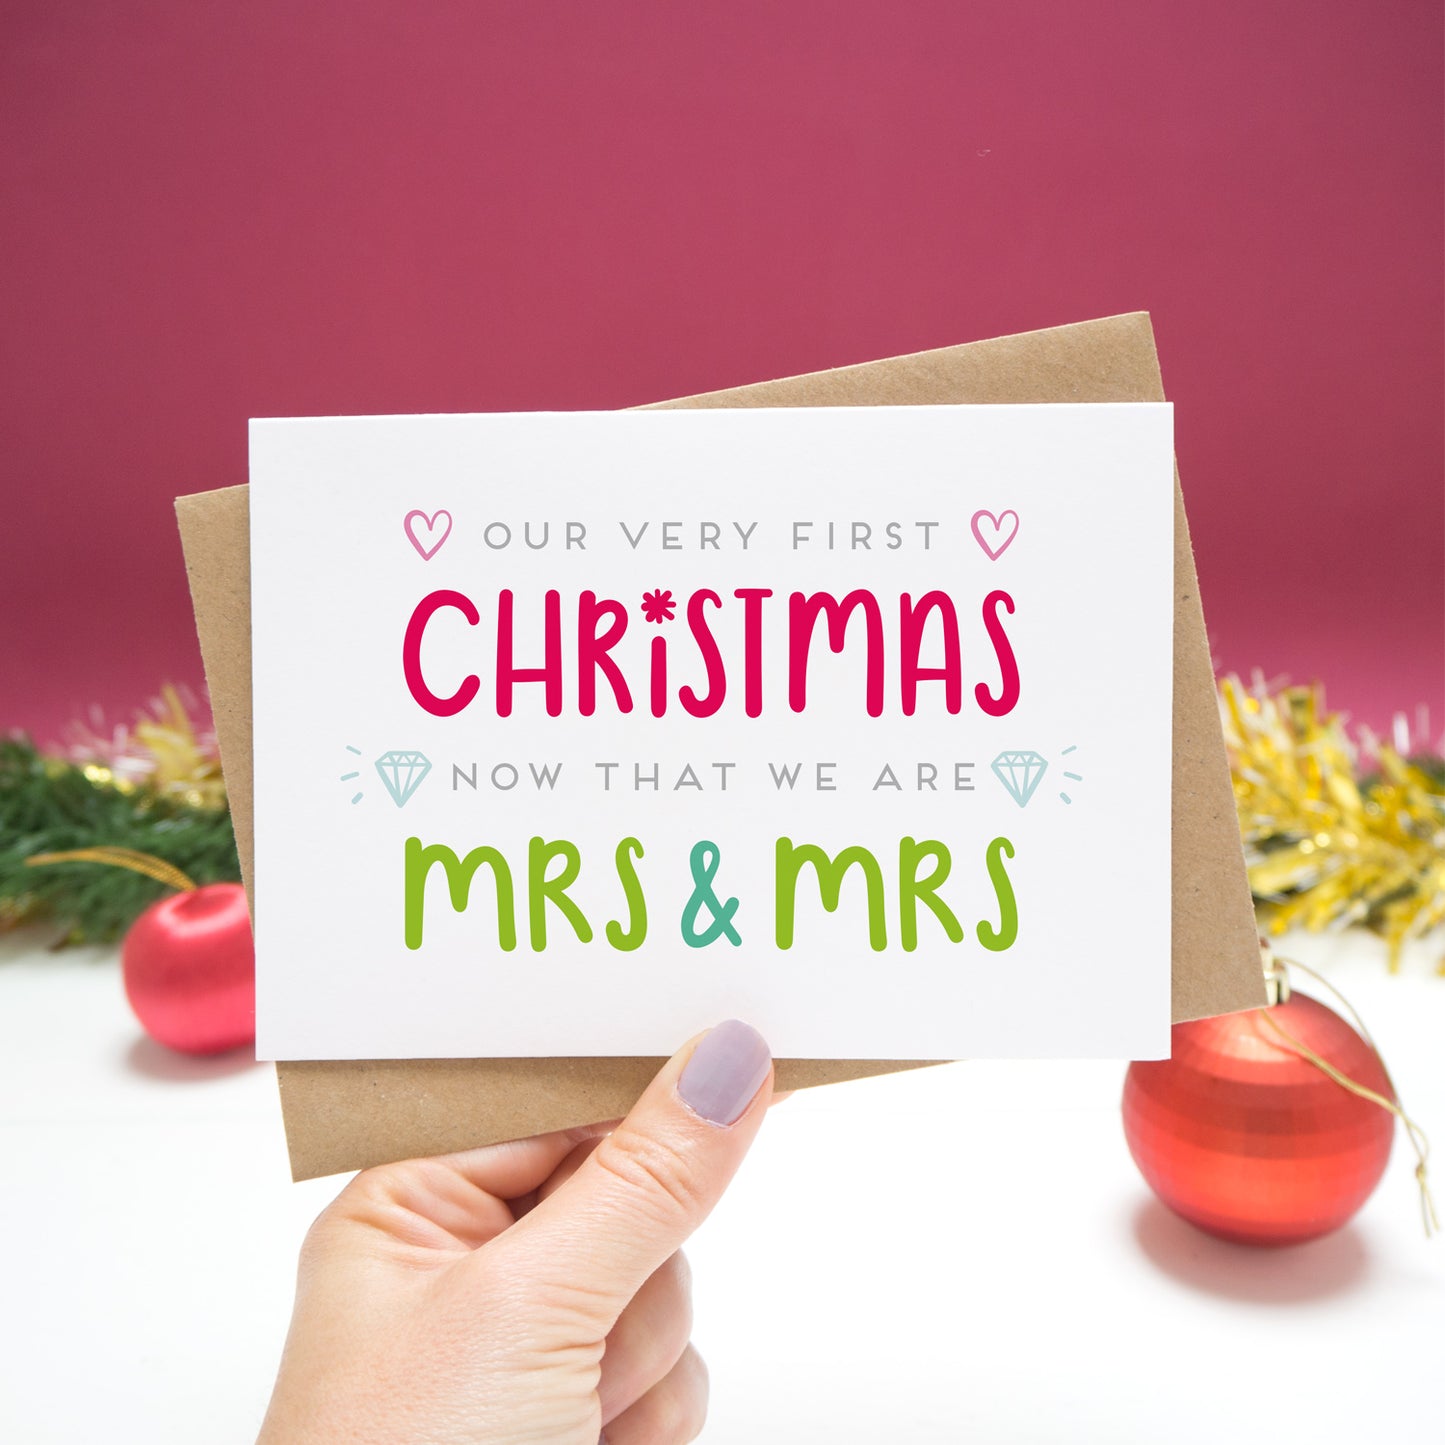 'Our very first Christmas now that we are Mrs and Mrs.' Christmas Card held in front of a Christmassy scene with baubles and tinsel.